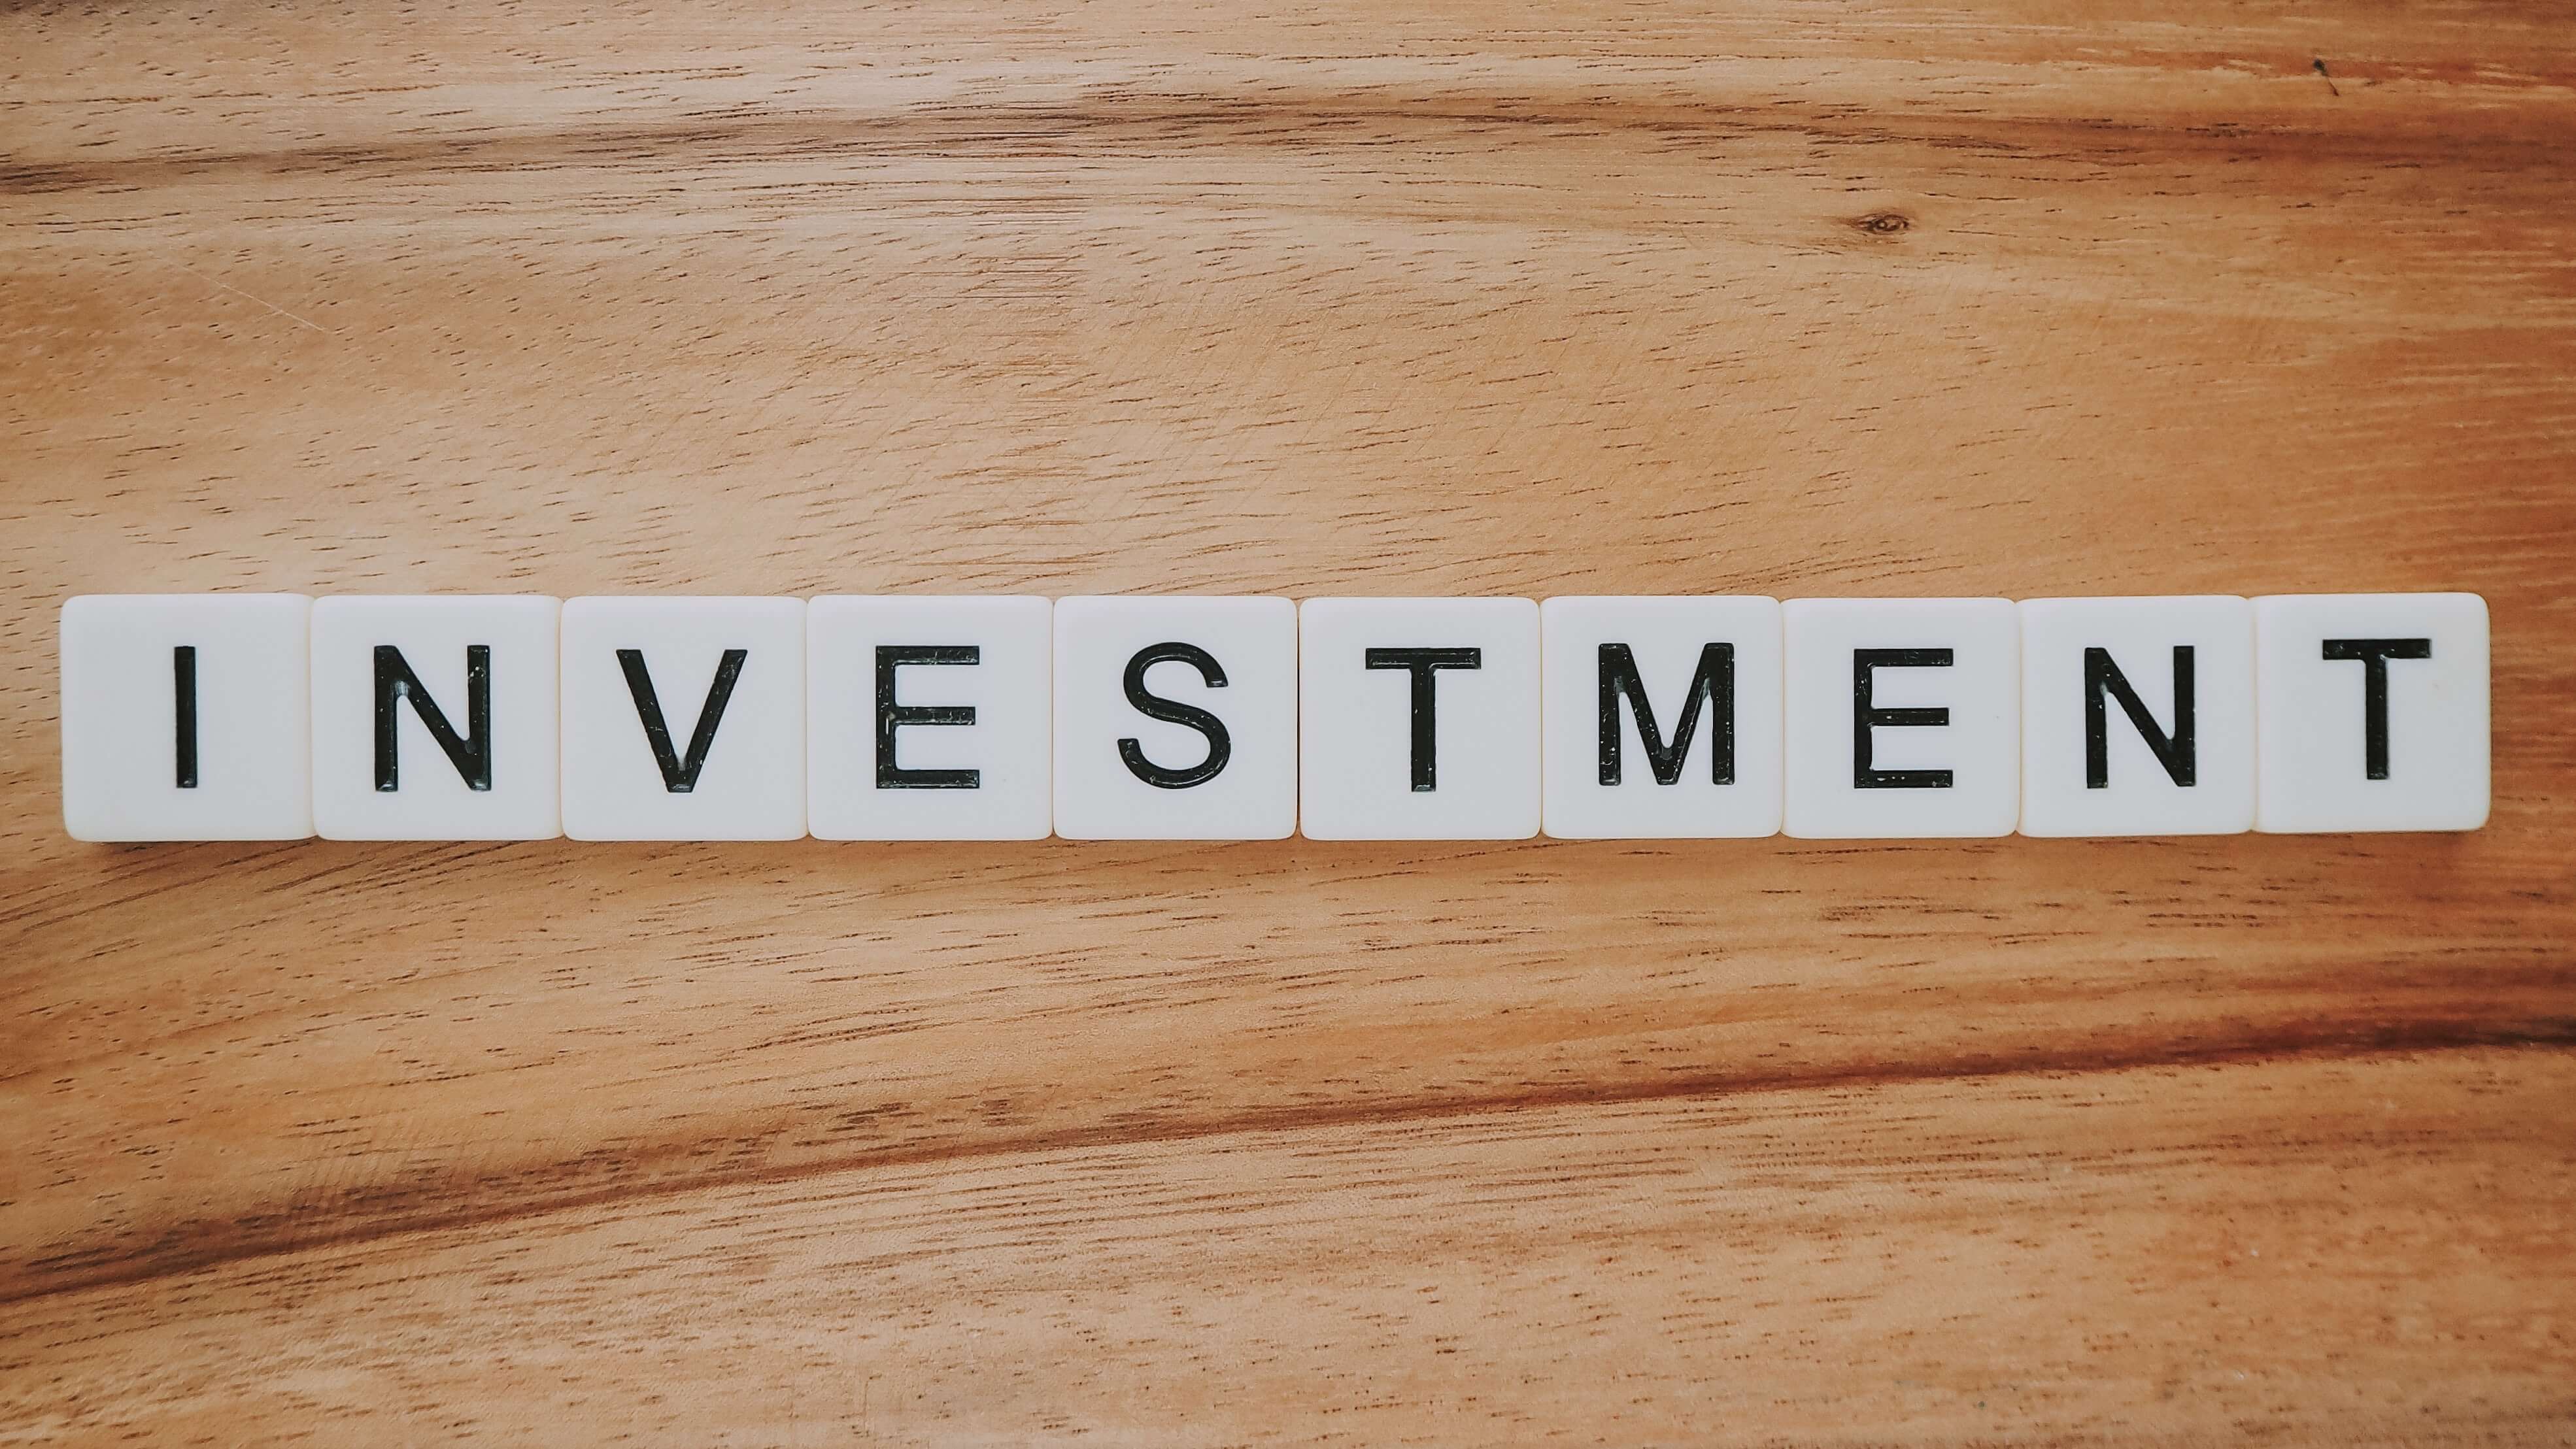 scrabble words that reads 'Investment'